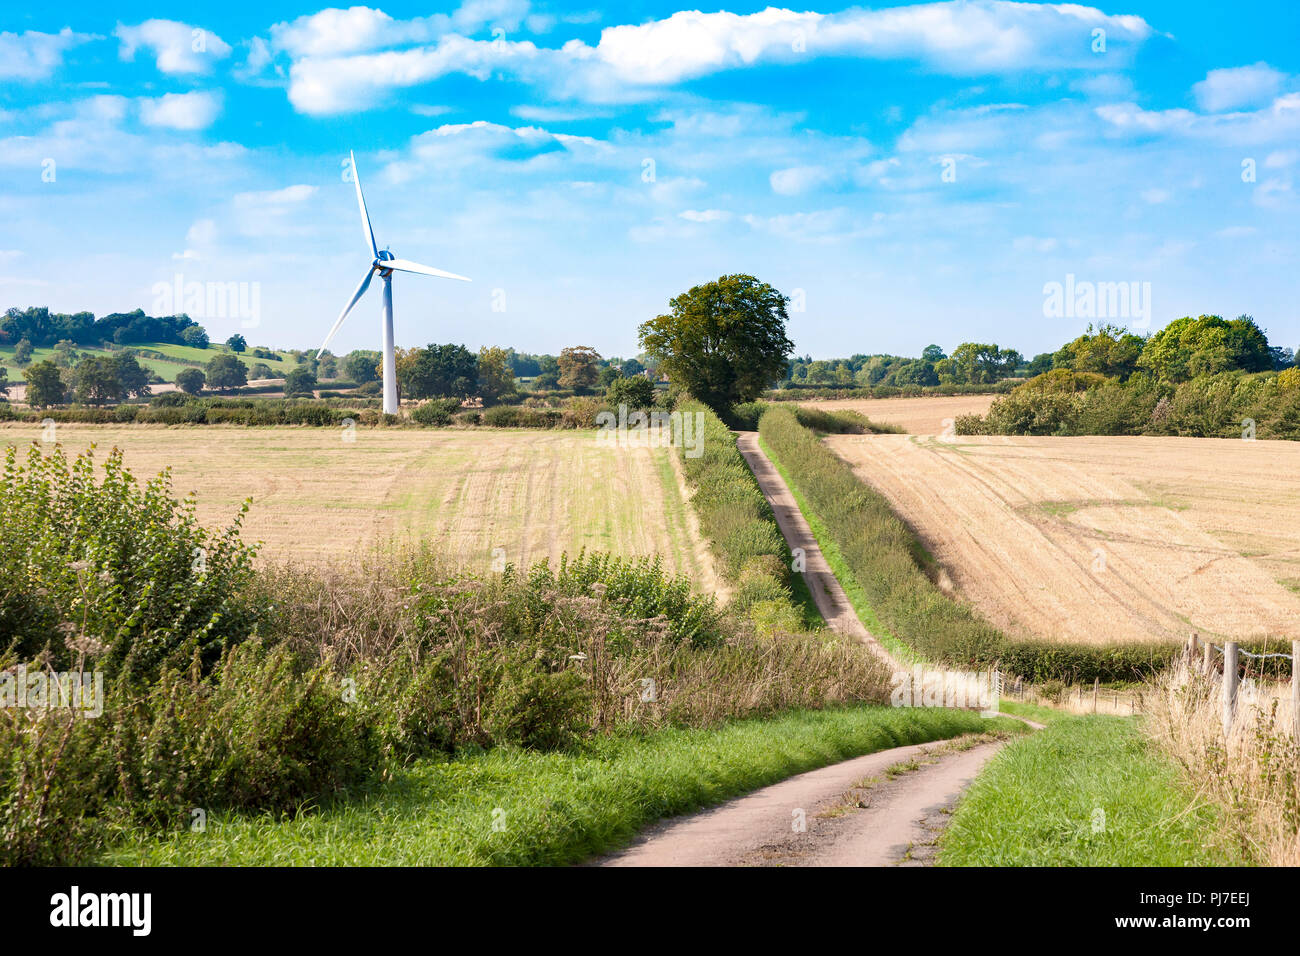 Single wind turbine near Daventry, a market town in Northamptonshire, England, Stock Photo